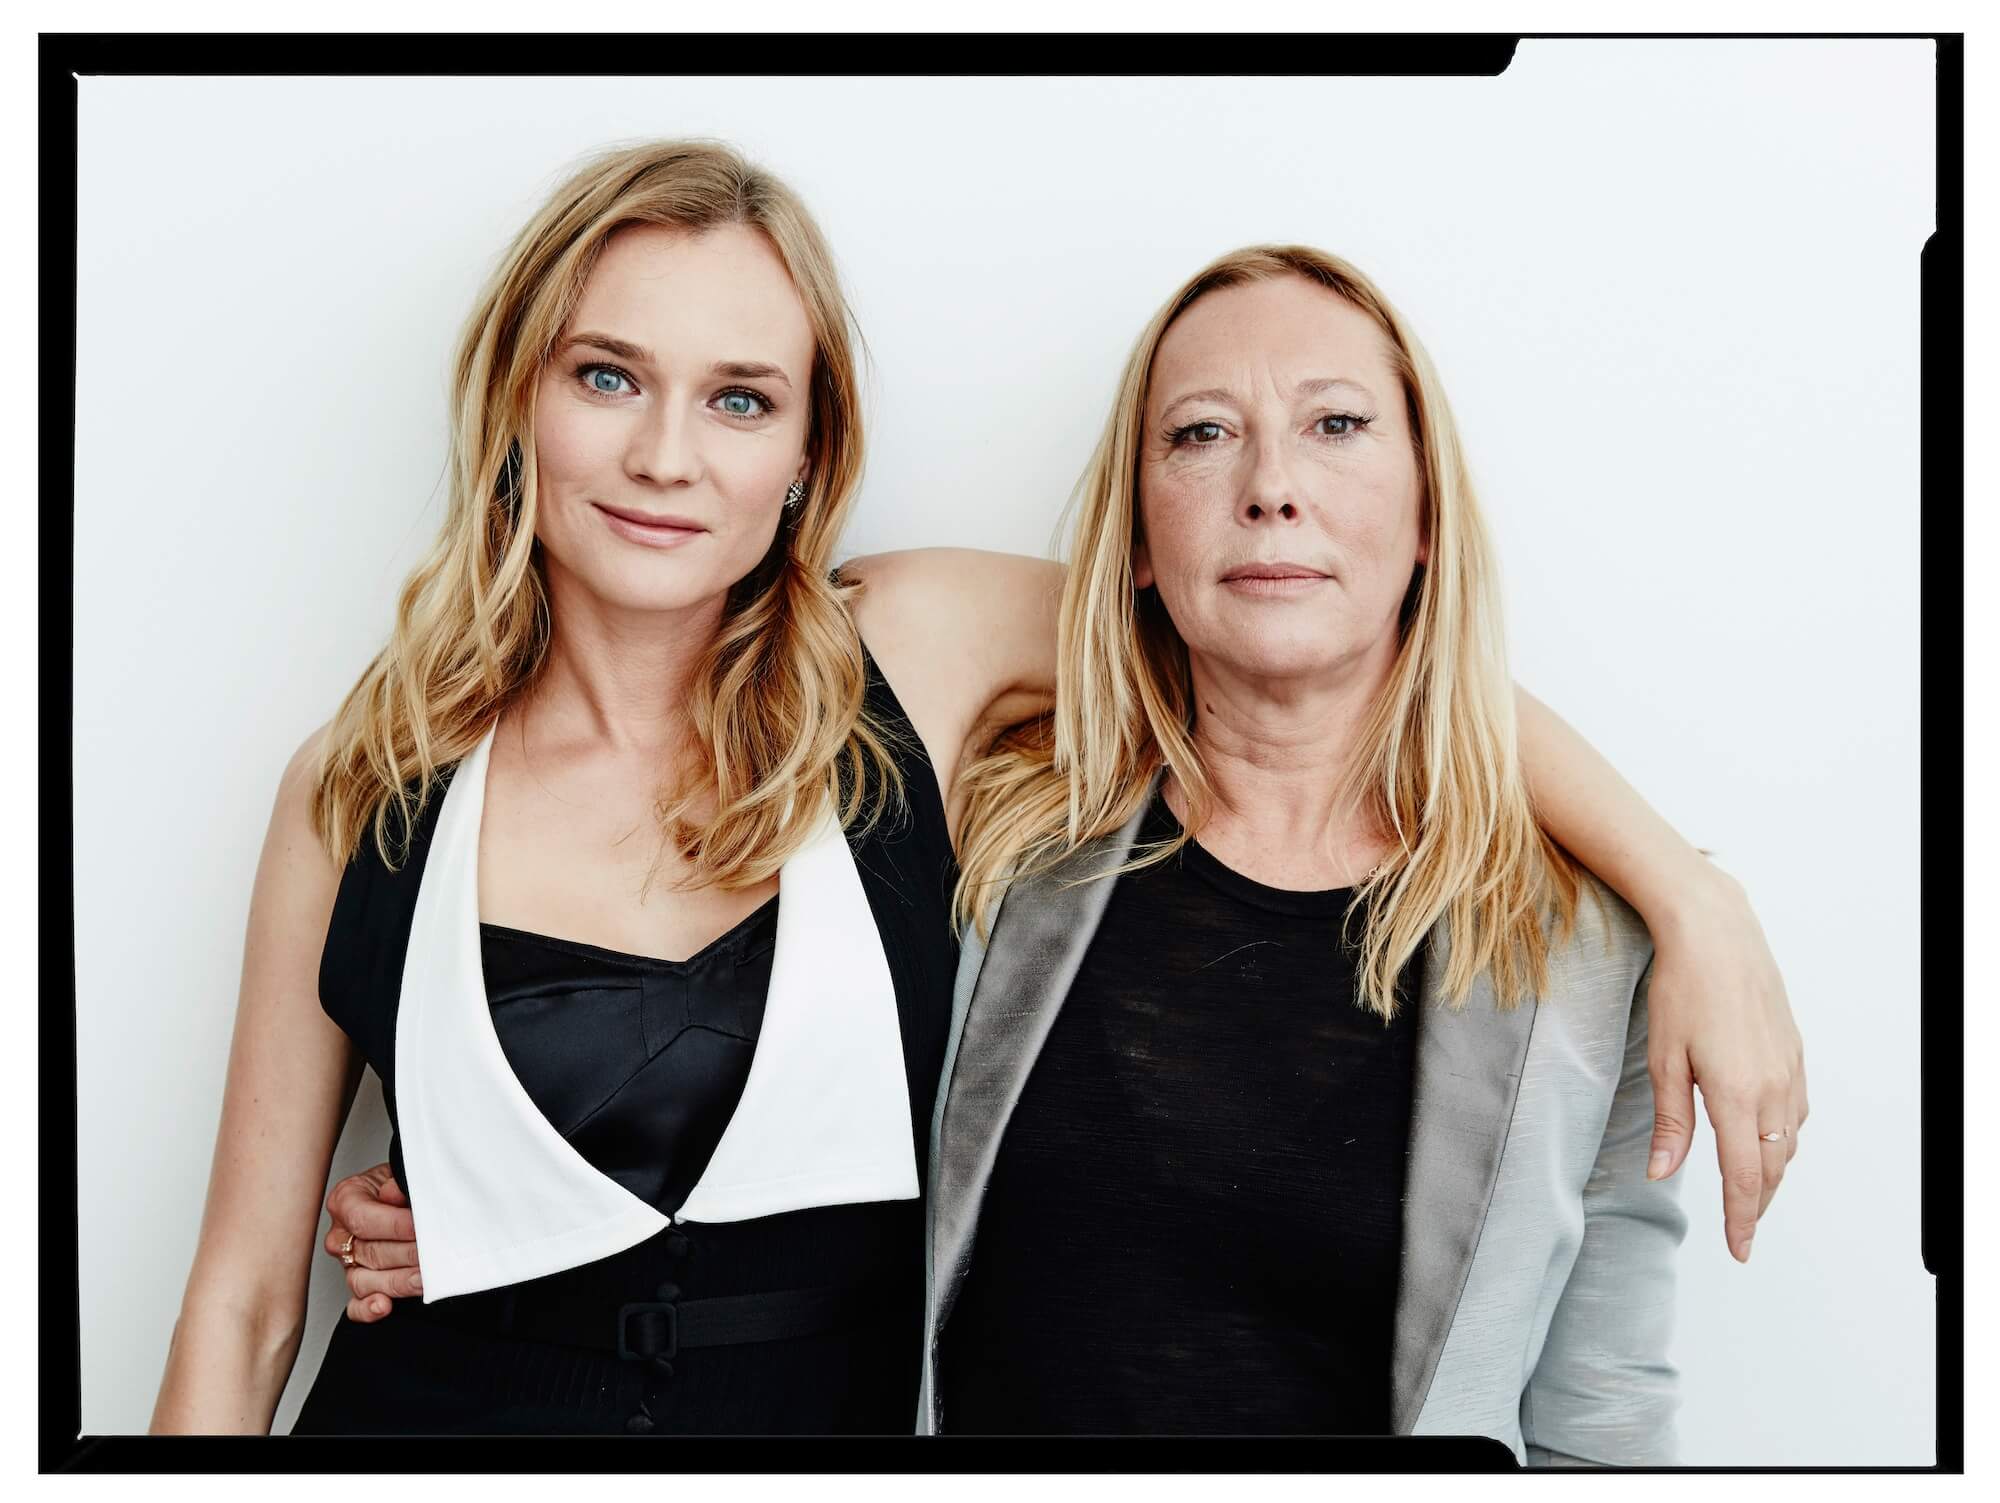 Diane Kruger: Movie 'Sky' is a 'unique look' at America